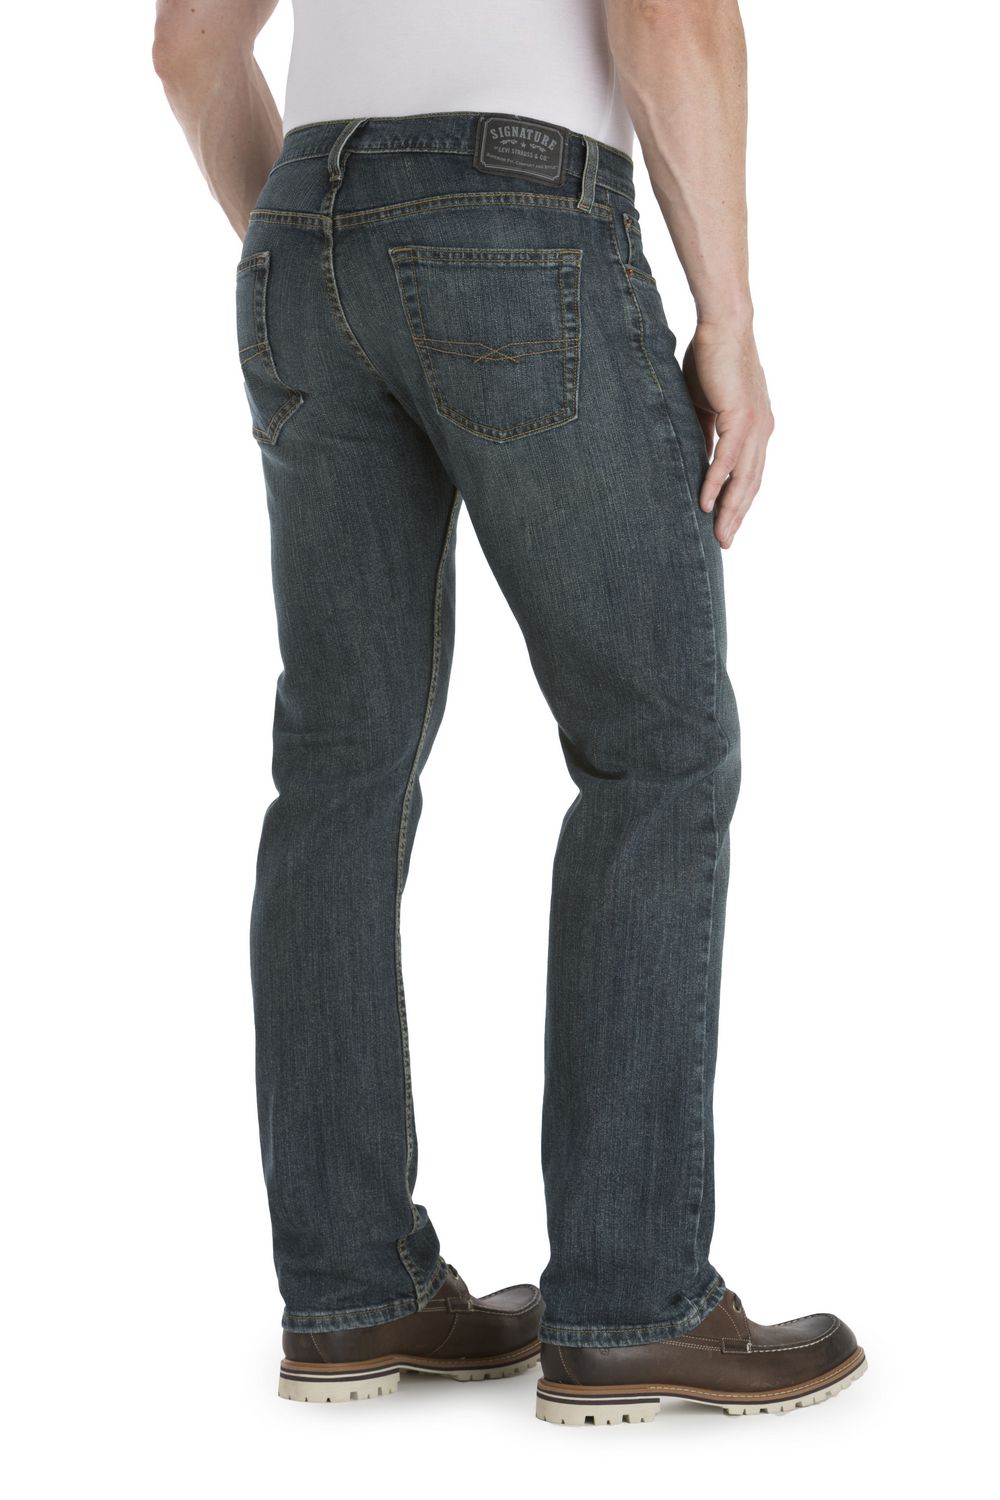 Signature by Levi Strauss & Co.™ Men's S51 Straight Fit | Walmart Canada